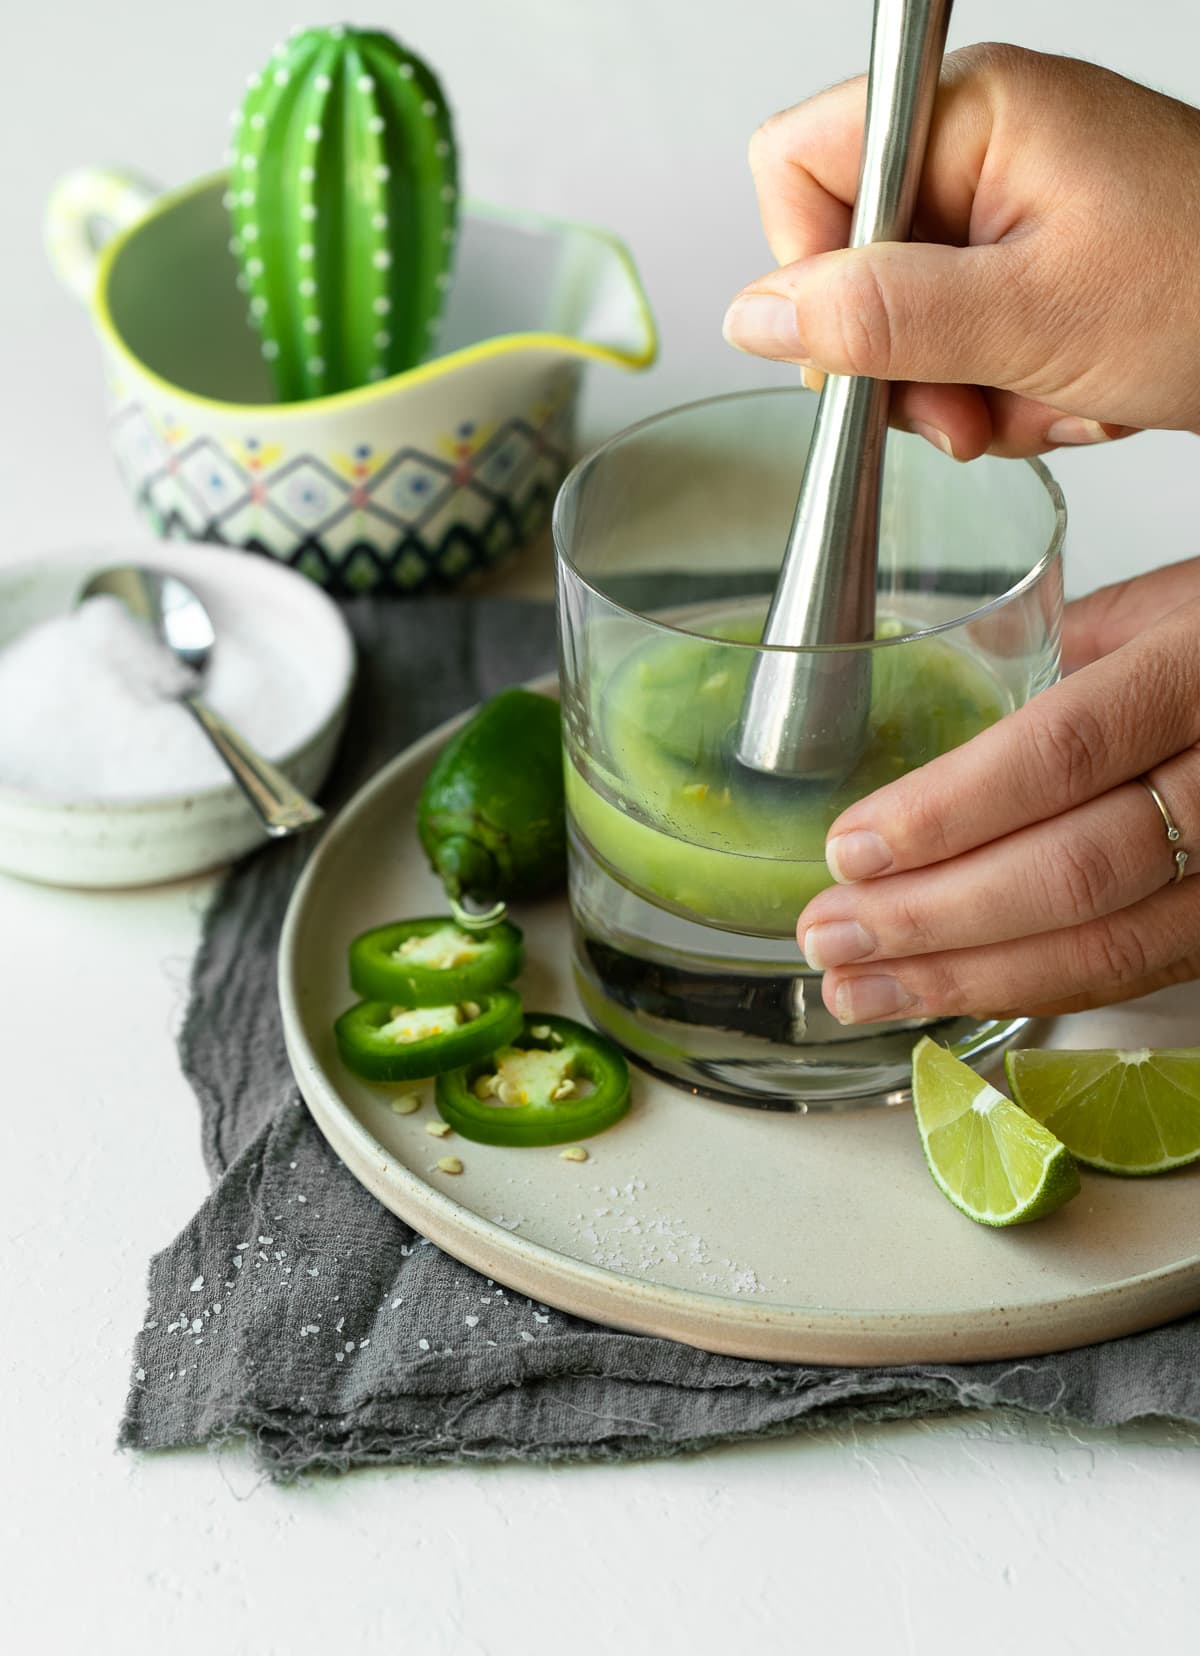 Lime and jalapeno slices being muddled together.